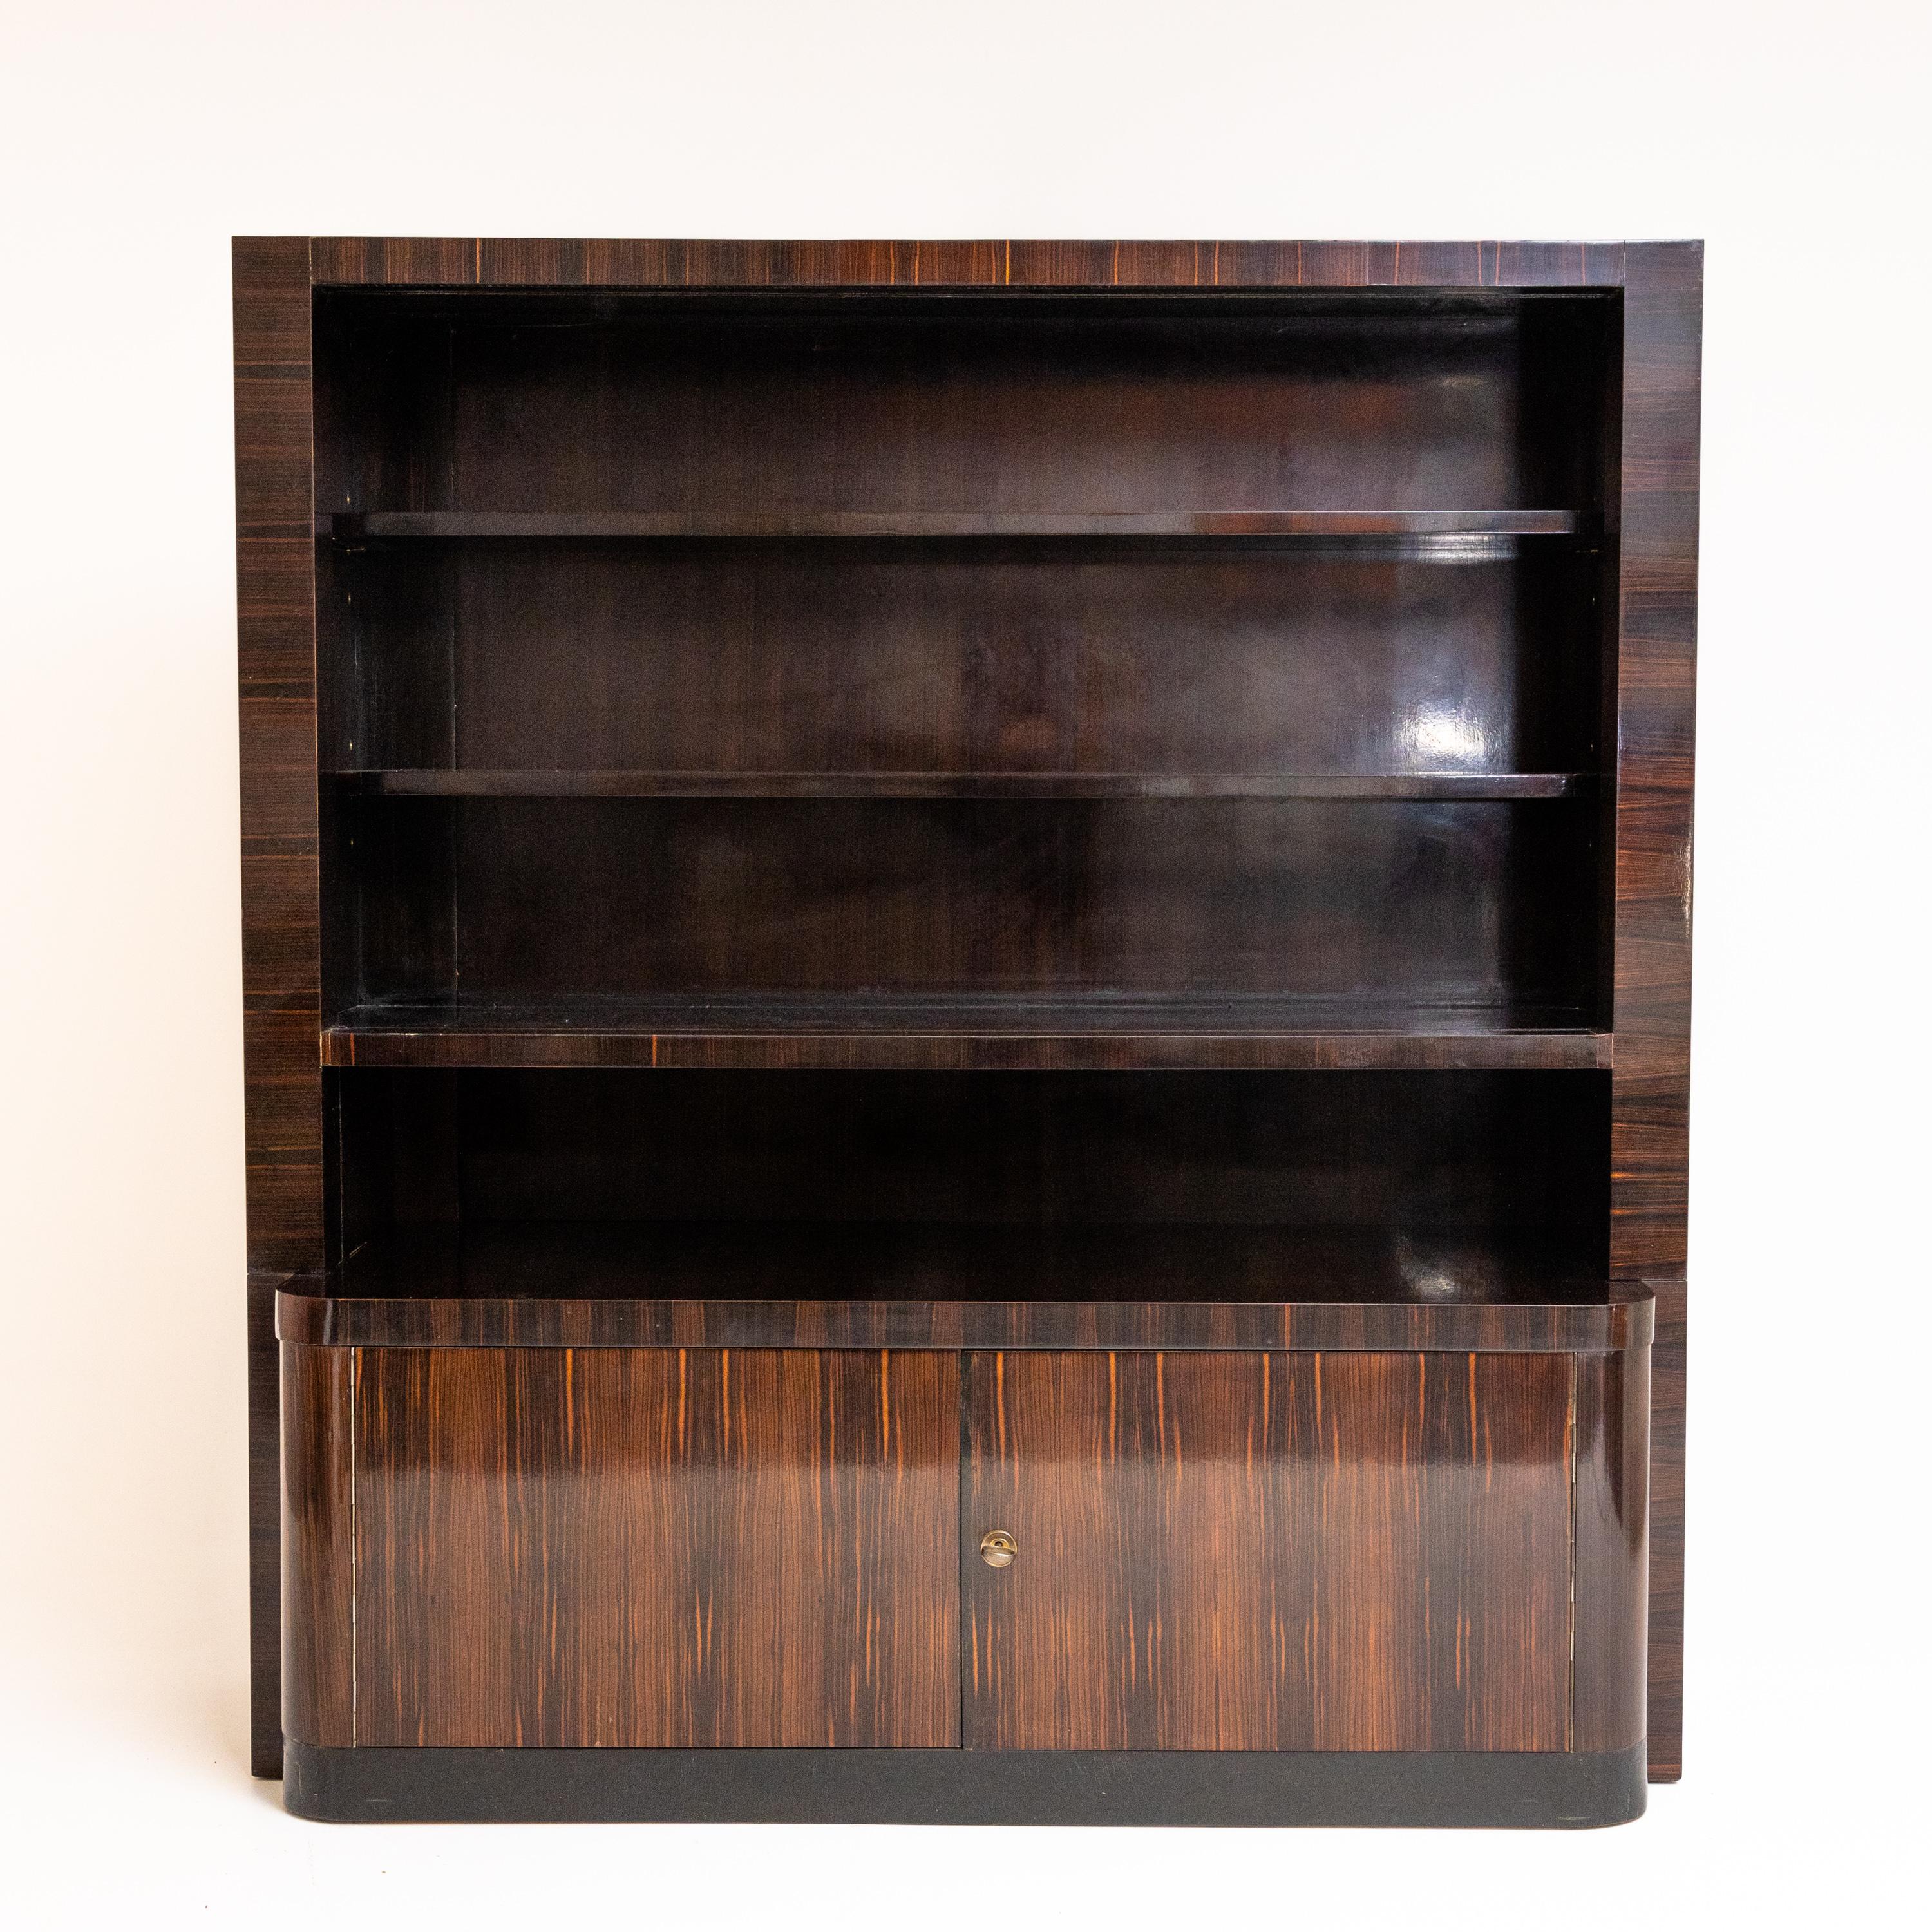 Bookcase by Bruno Paul (1874-1968) with four shelves and a two-door base cabinet. Unrestored condition.